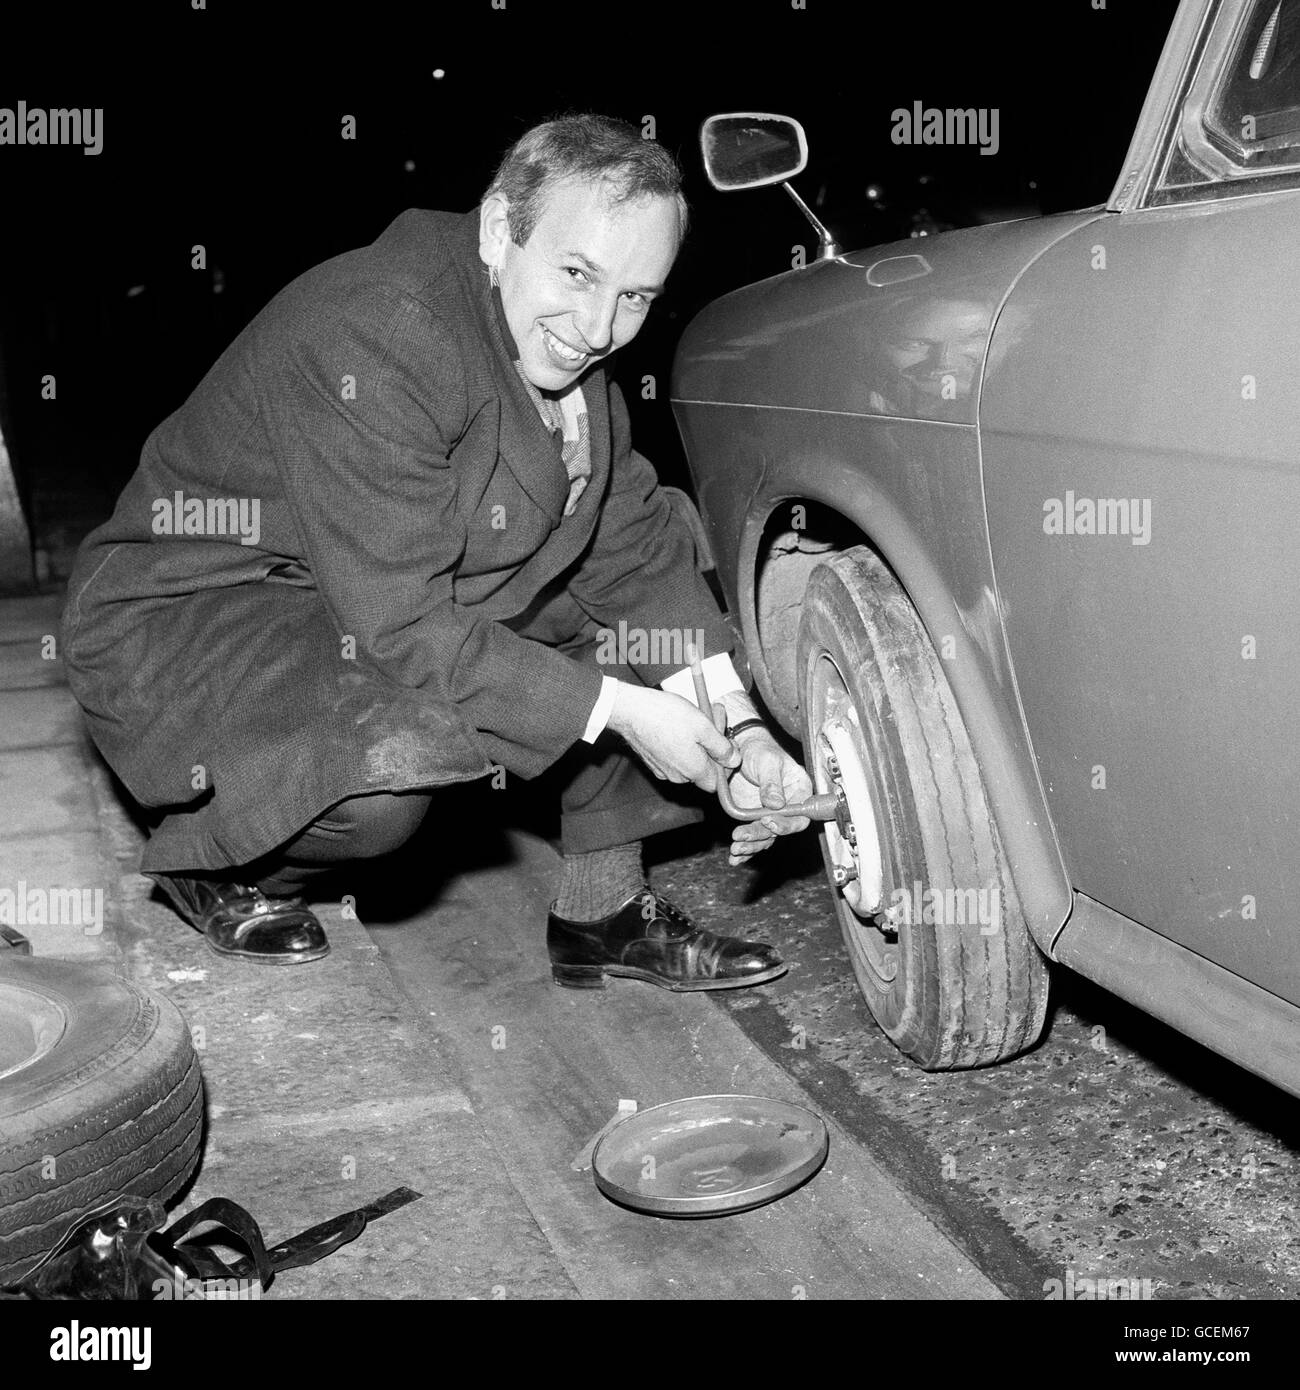 John Surtees stops to change a tyre after getting a puncture. Stock Photo